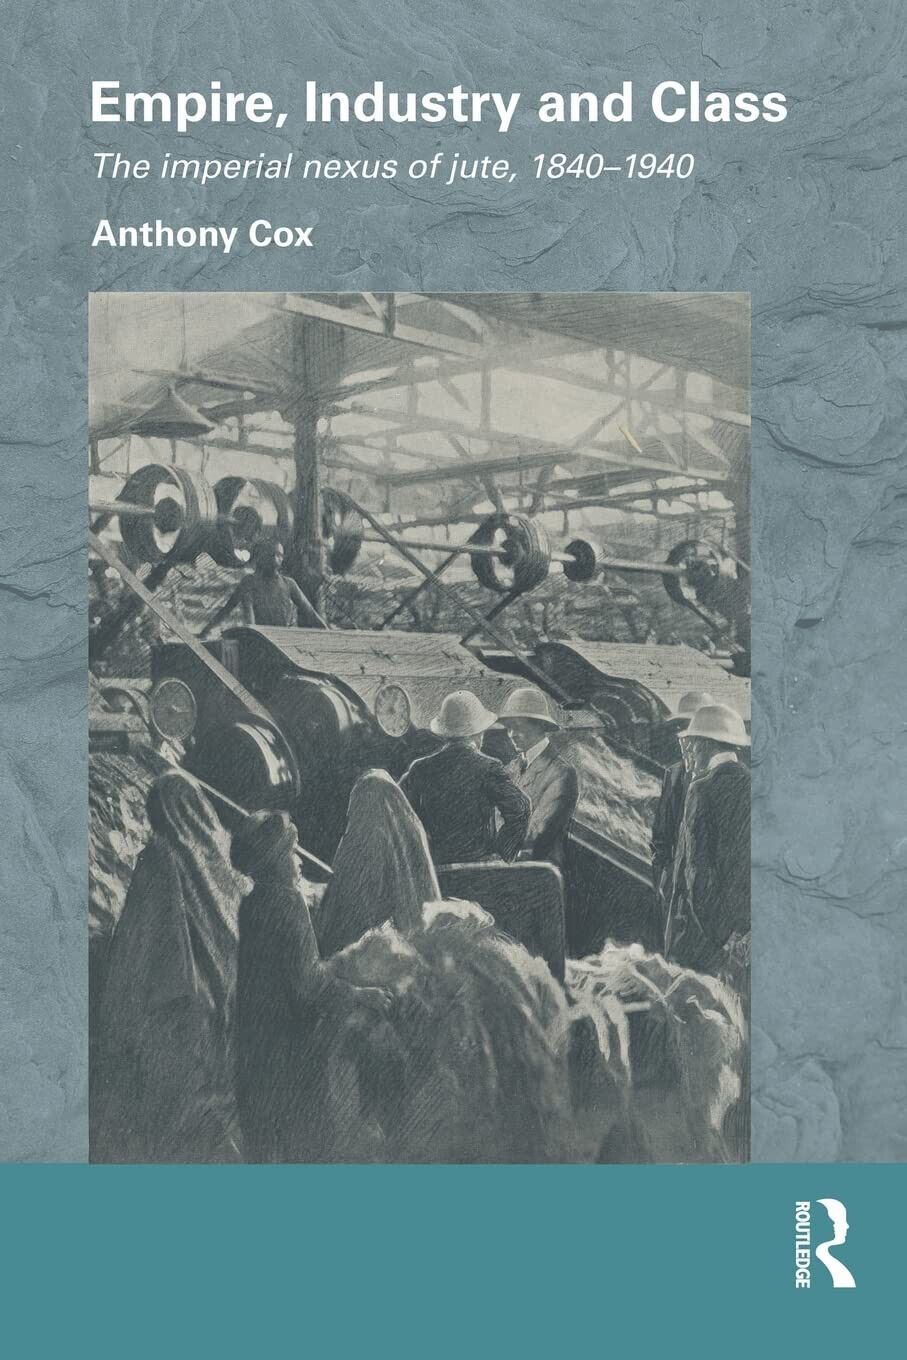 Empire, Industry and Class - Anthony Cox - Routledge, 2015 libro usato